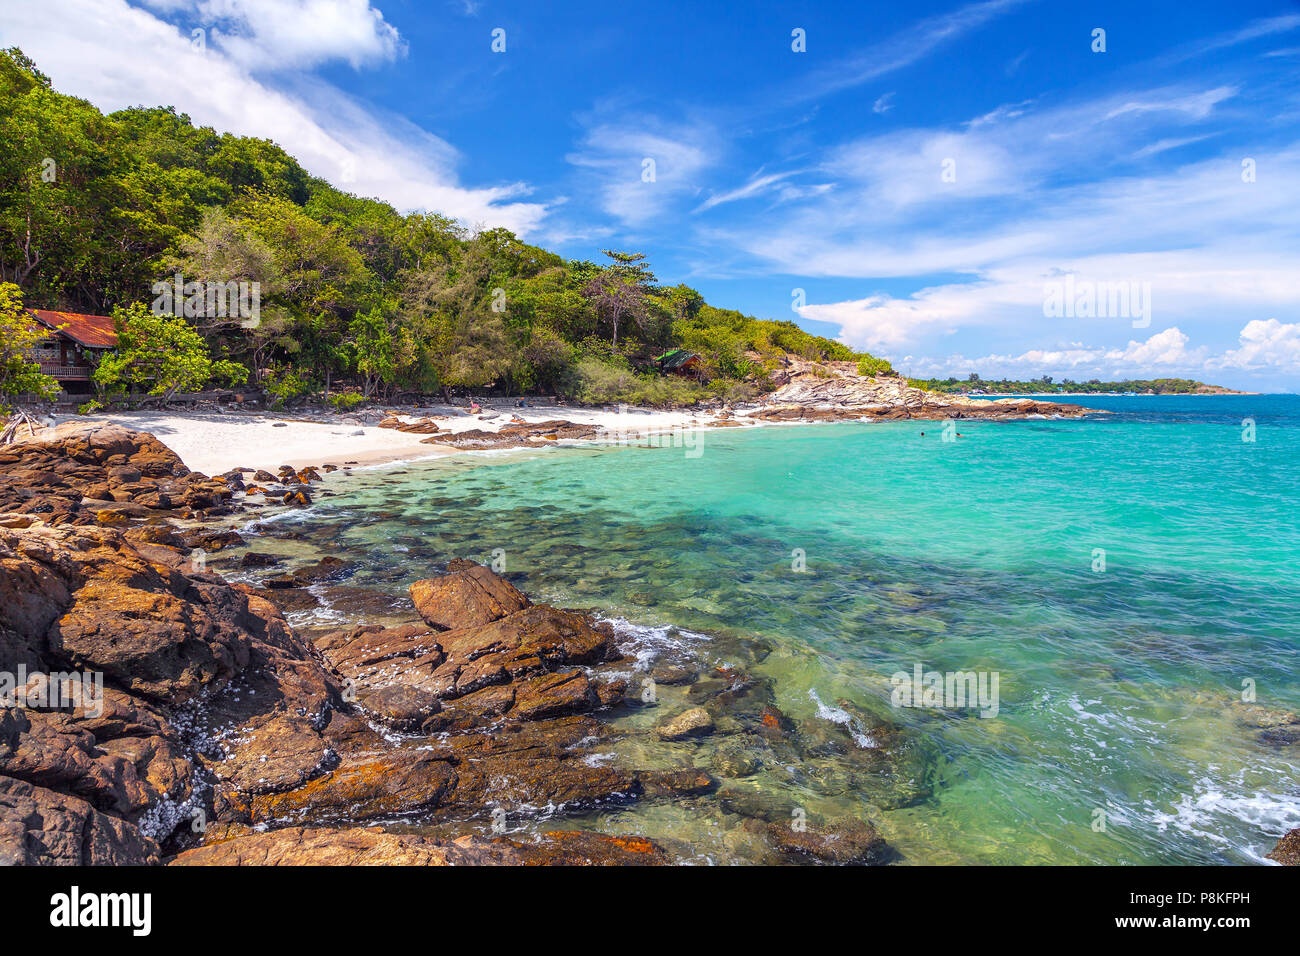 Beautiful tropical beach on the island of Samed in Thailand. Stock Photo